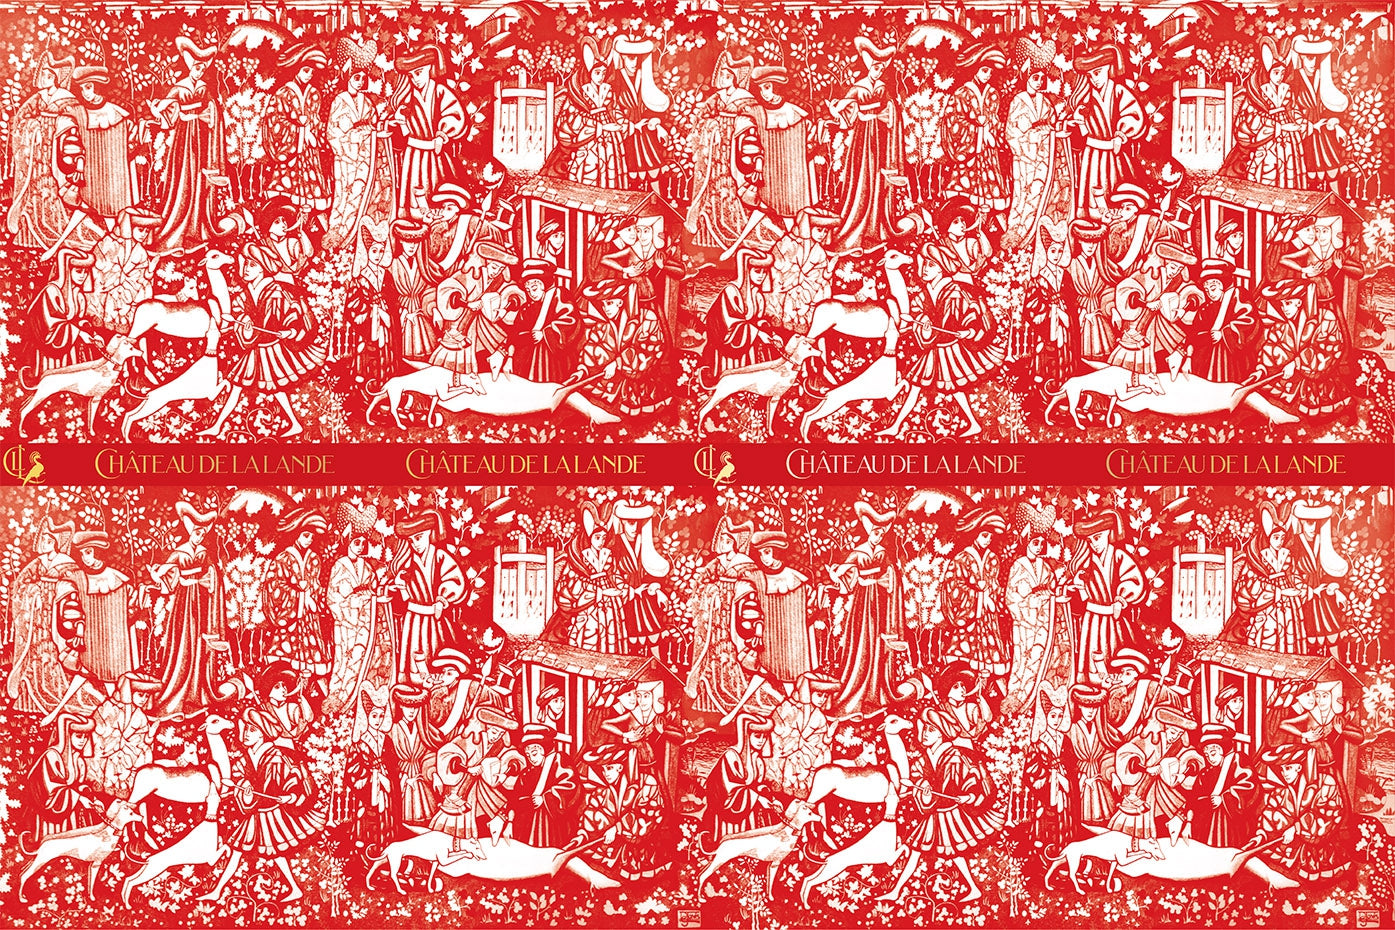 Red Wrapping Paper